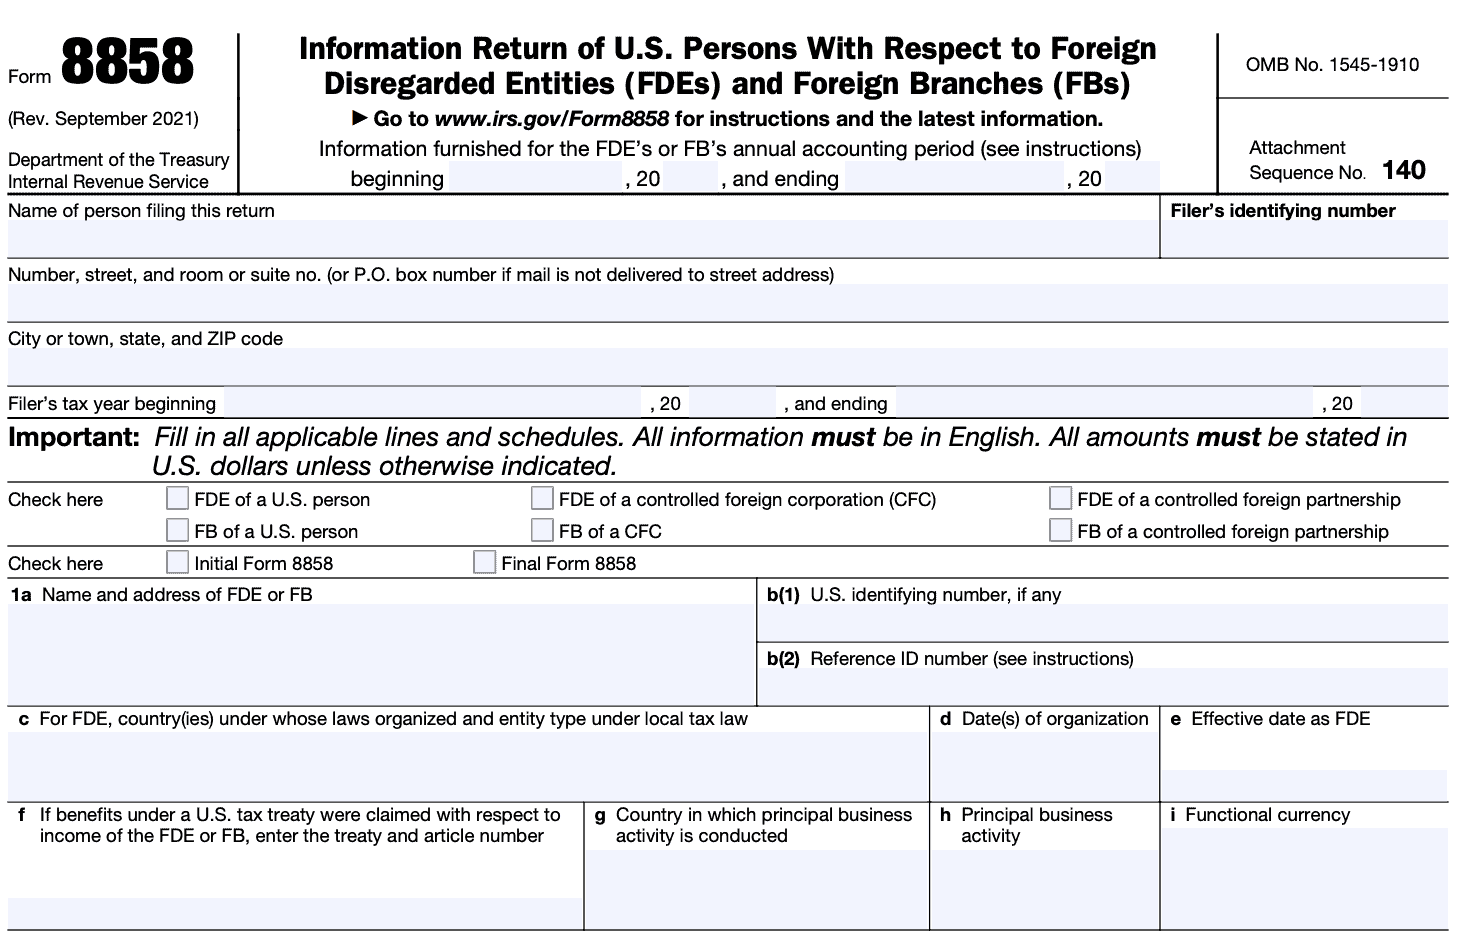 irs form 8858, information return of u.s. persons with respect to foreign disregarded entities (FDEs) and foreign branches (FBs)